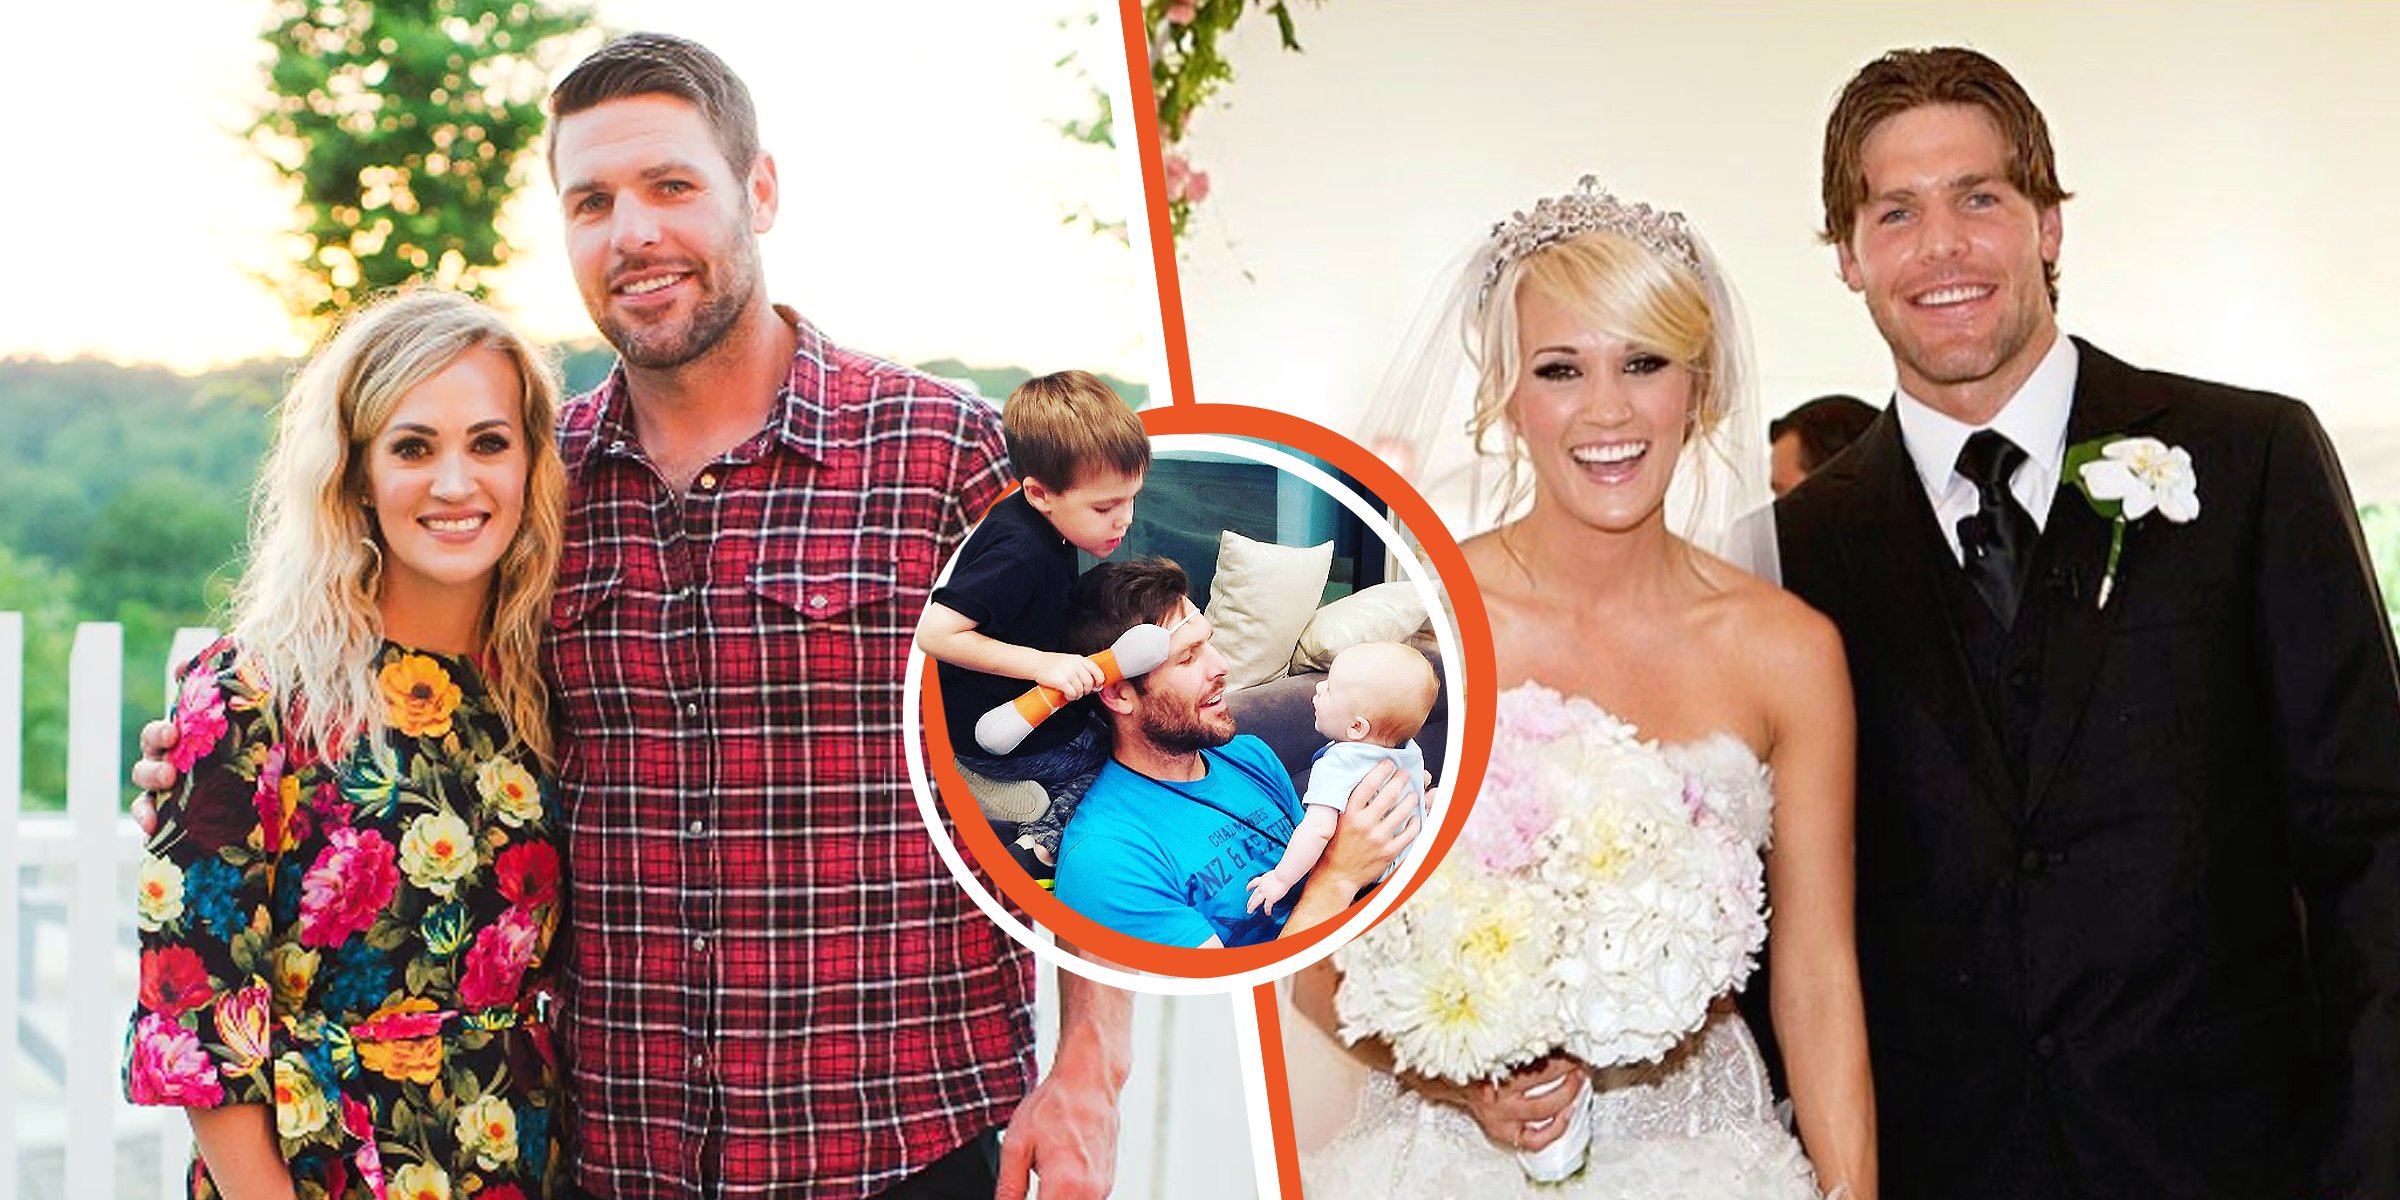 Mike Fisher and Carrie Underwood | Mike Fisher and Carrie Underwood | Isaiah, Mike, and Jacob Fisher | Source: www.instagram.com/carrieunderwood/ | www.instagram.com/mfisher1212/ |people.com/country/carrie-underwood-mike-fisher-love-story-details/